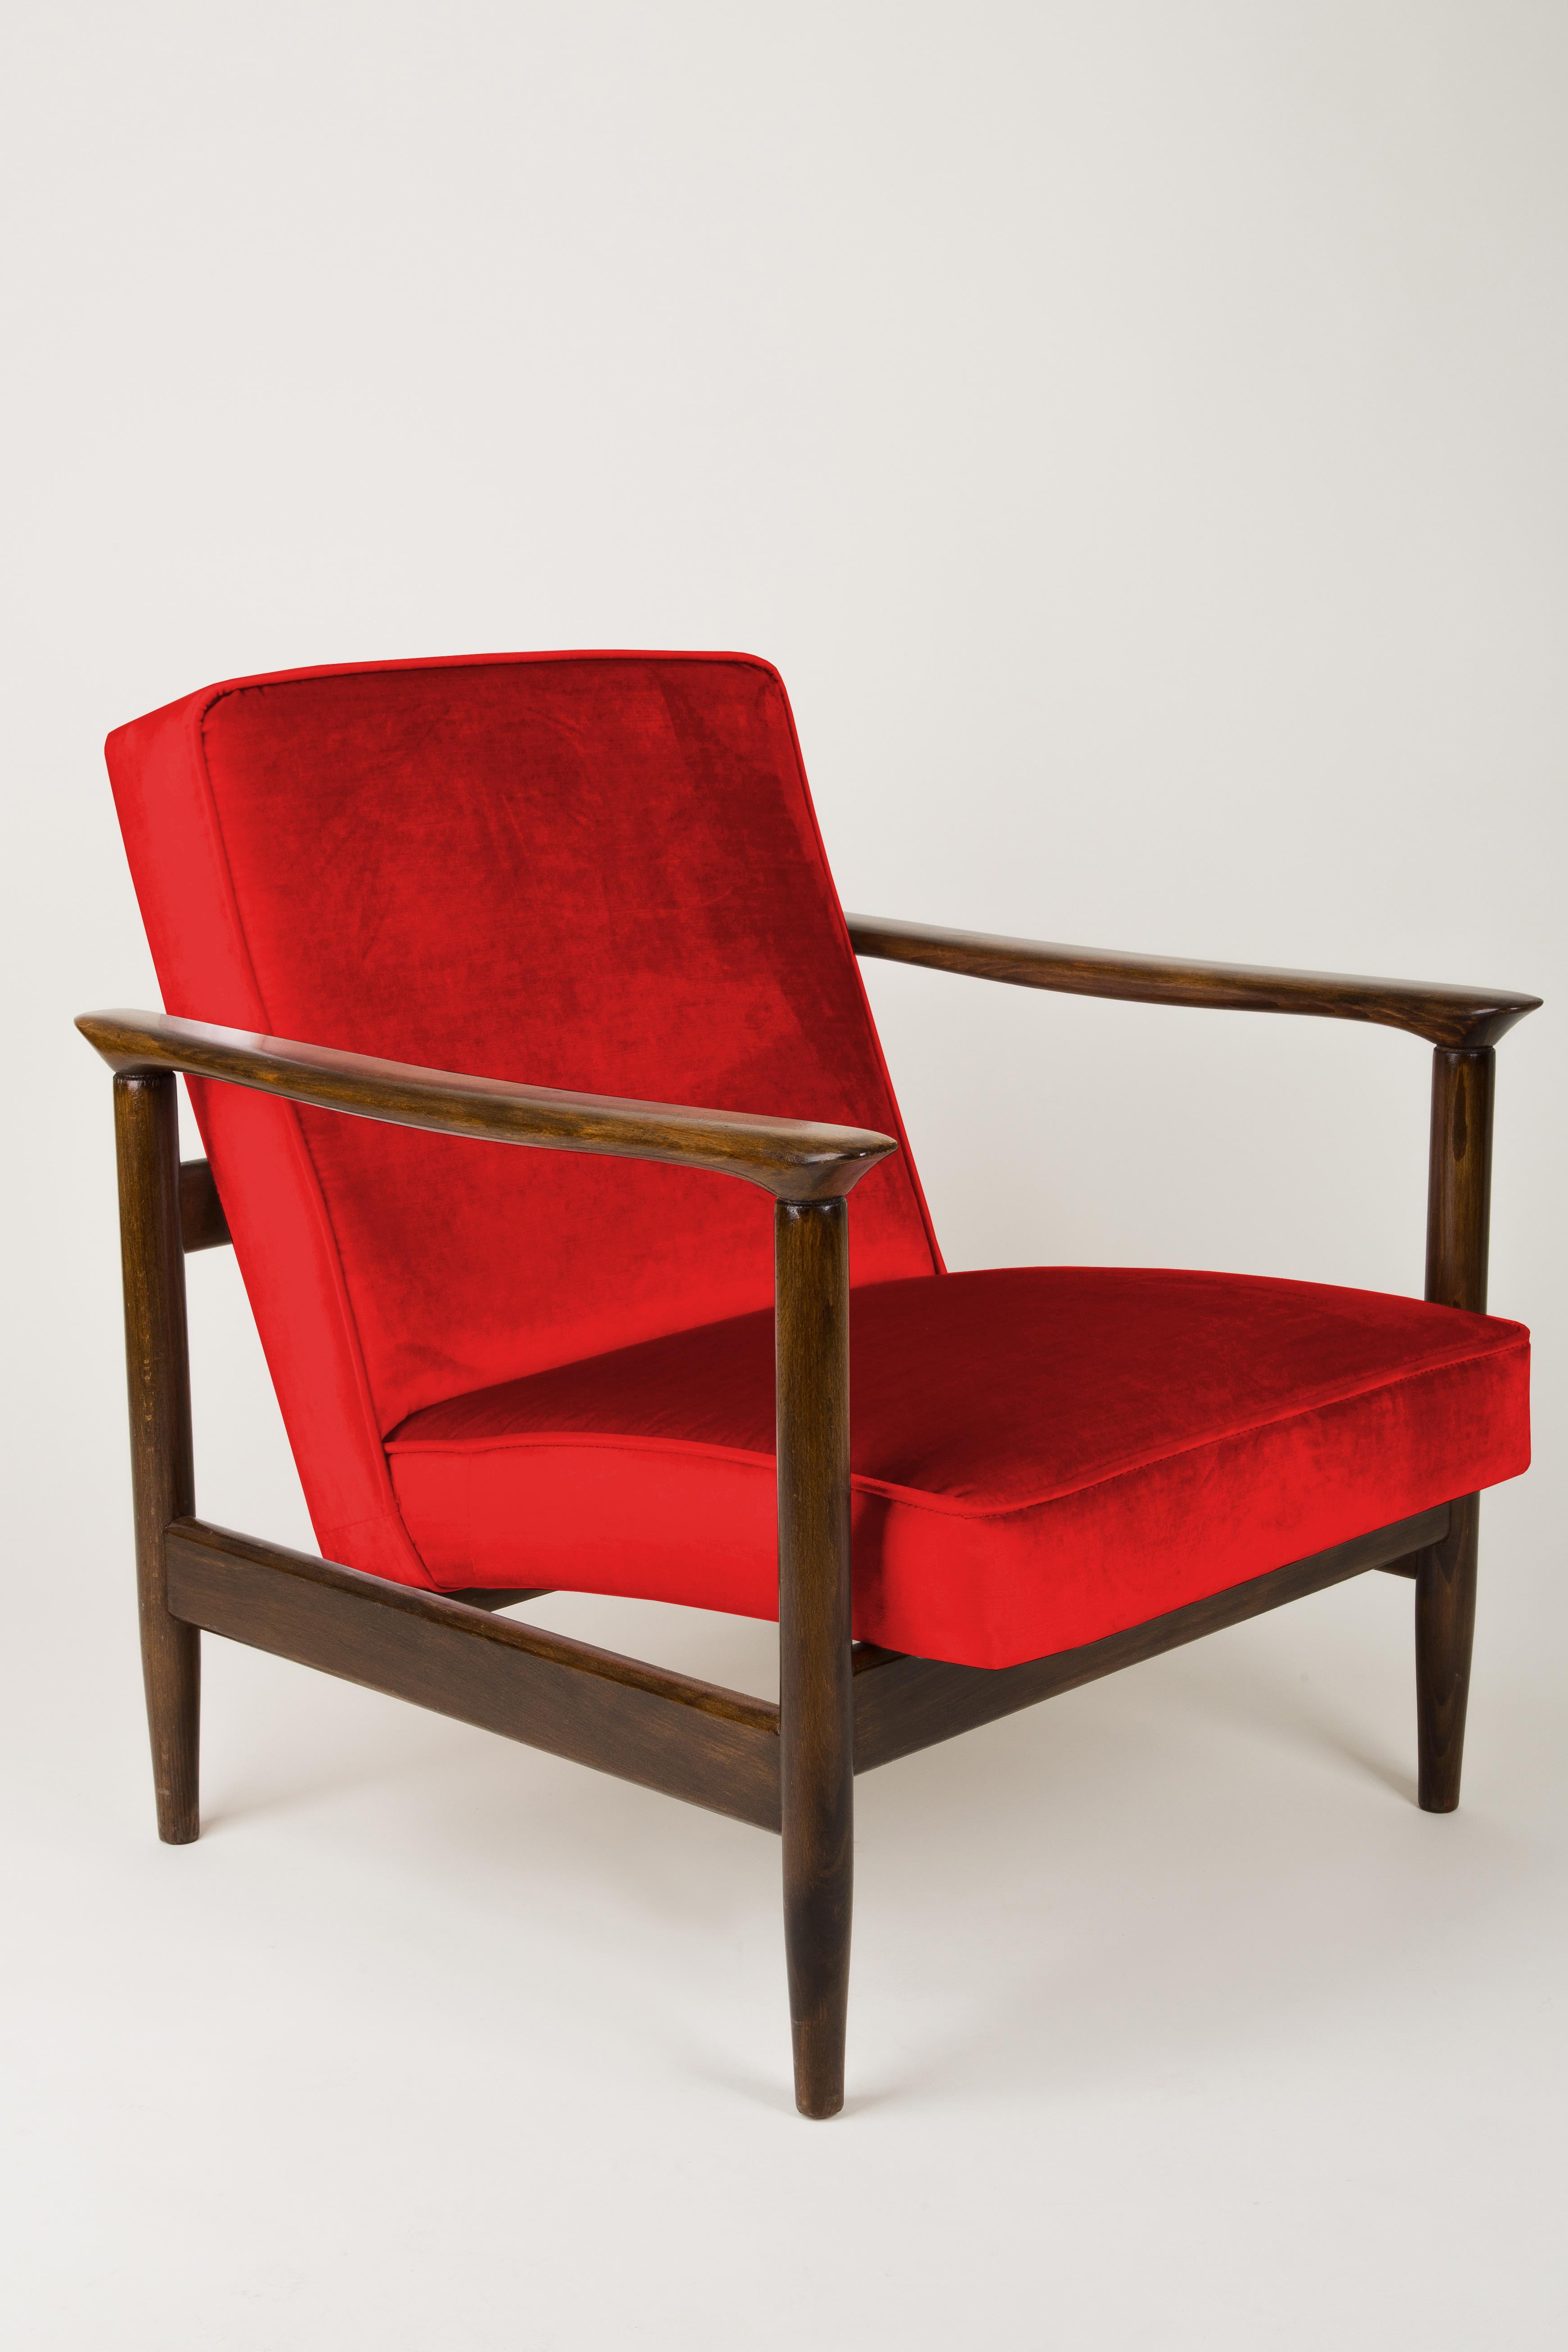 Mid-Century Modern Pair of Red Armchairs, Edmund Homa, GFM-142, 1960s, Poland For Sale